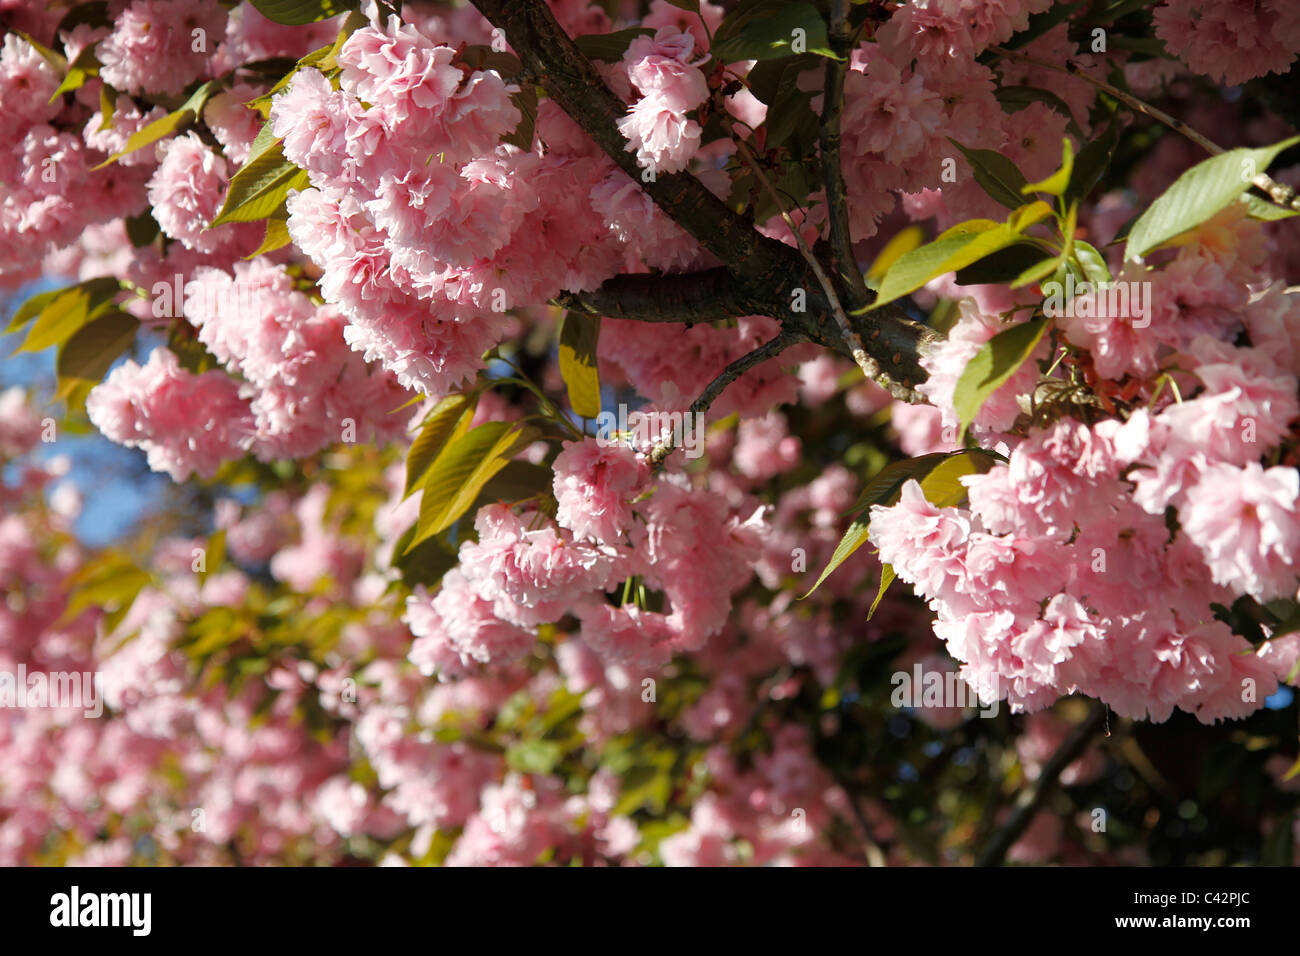 These are the blossoms of a Japanese cherry tree. The shot was taken in Germany, Bavaria. Stock Photo